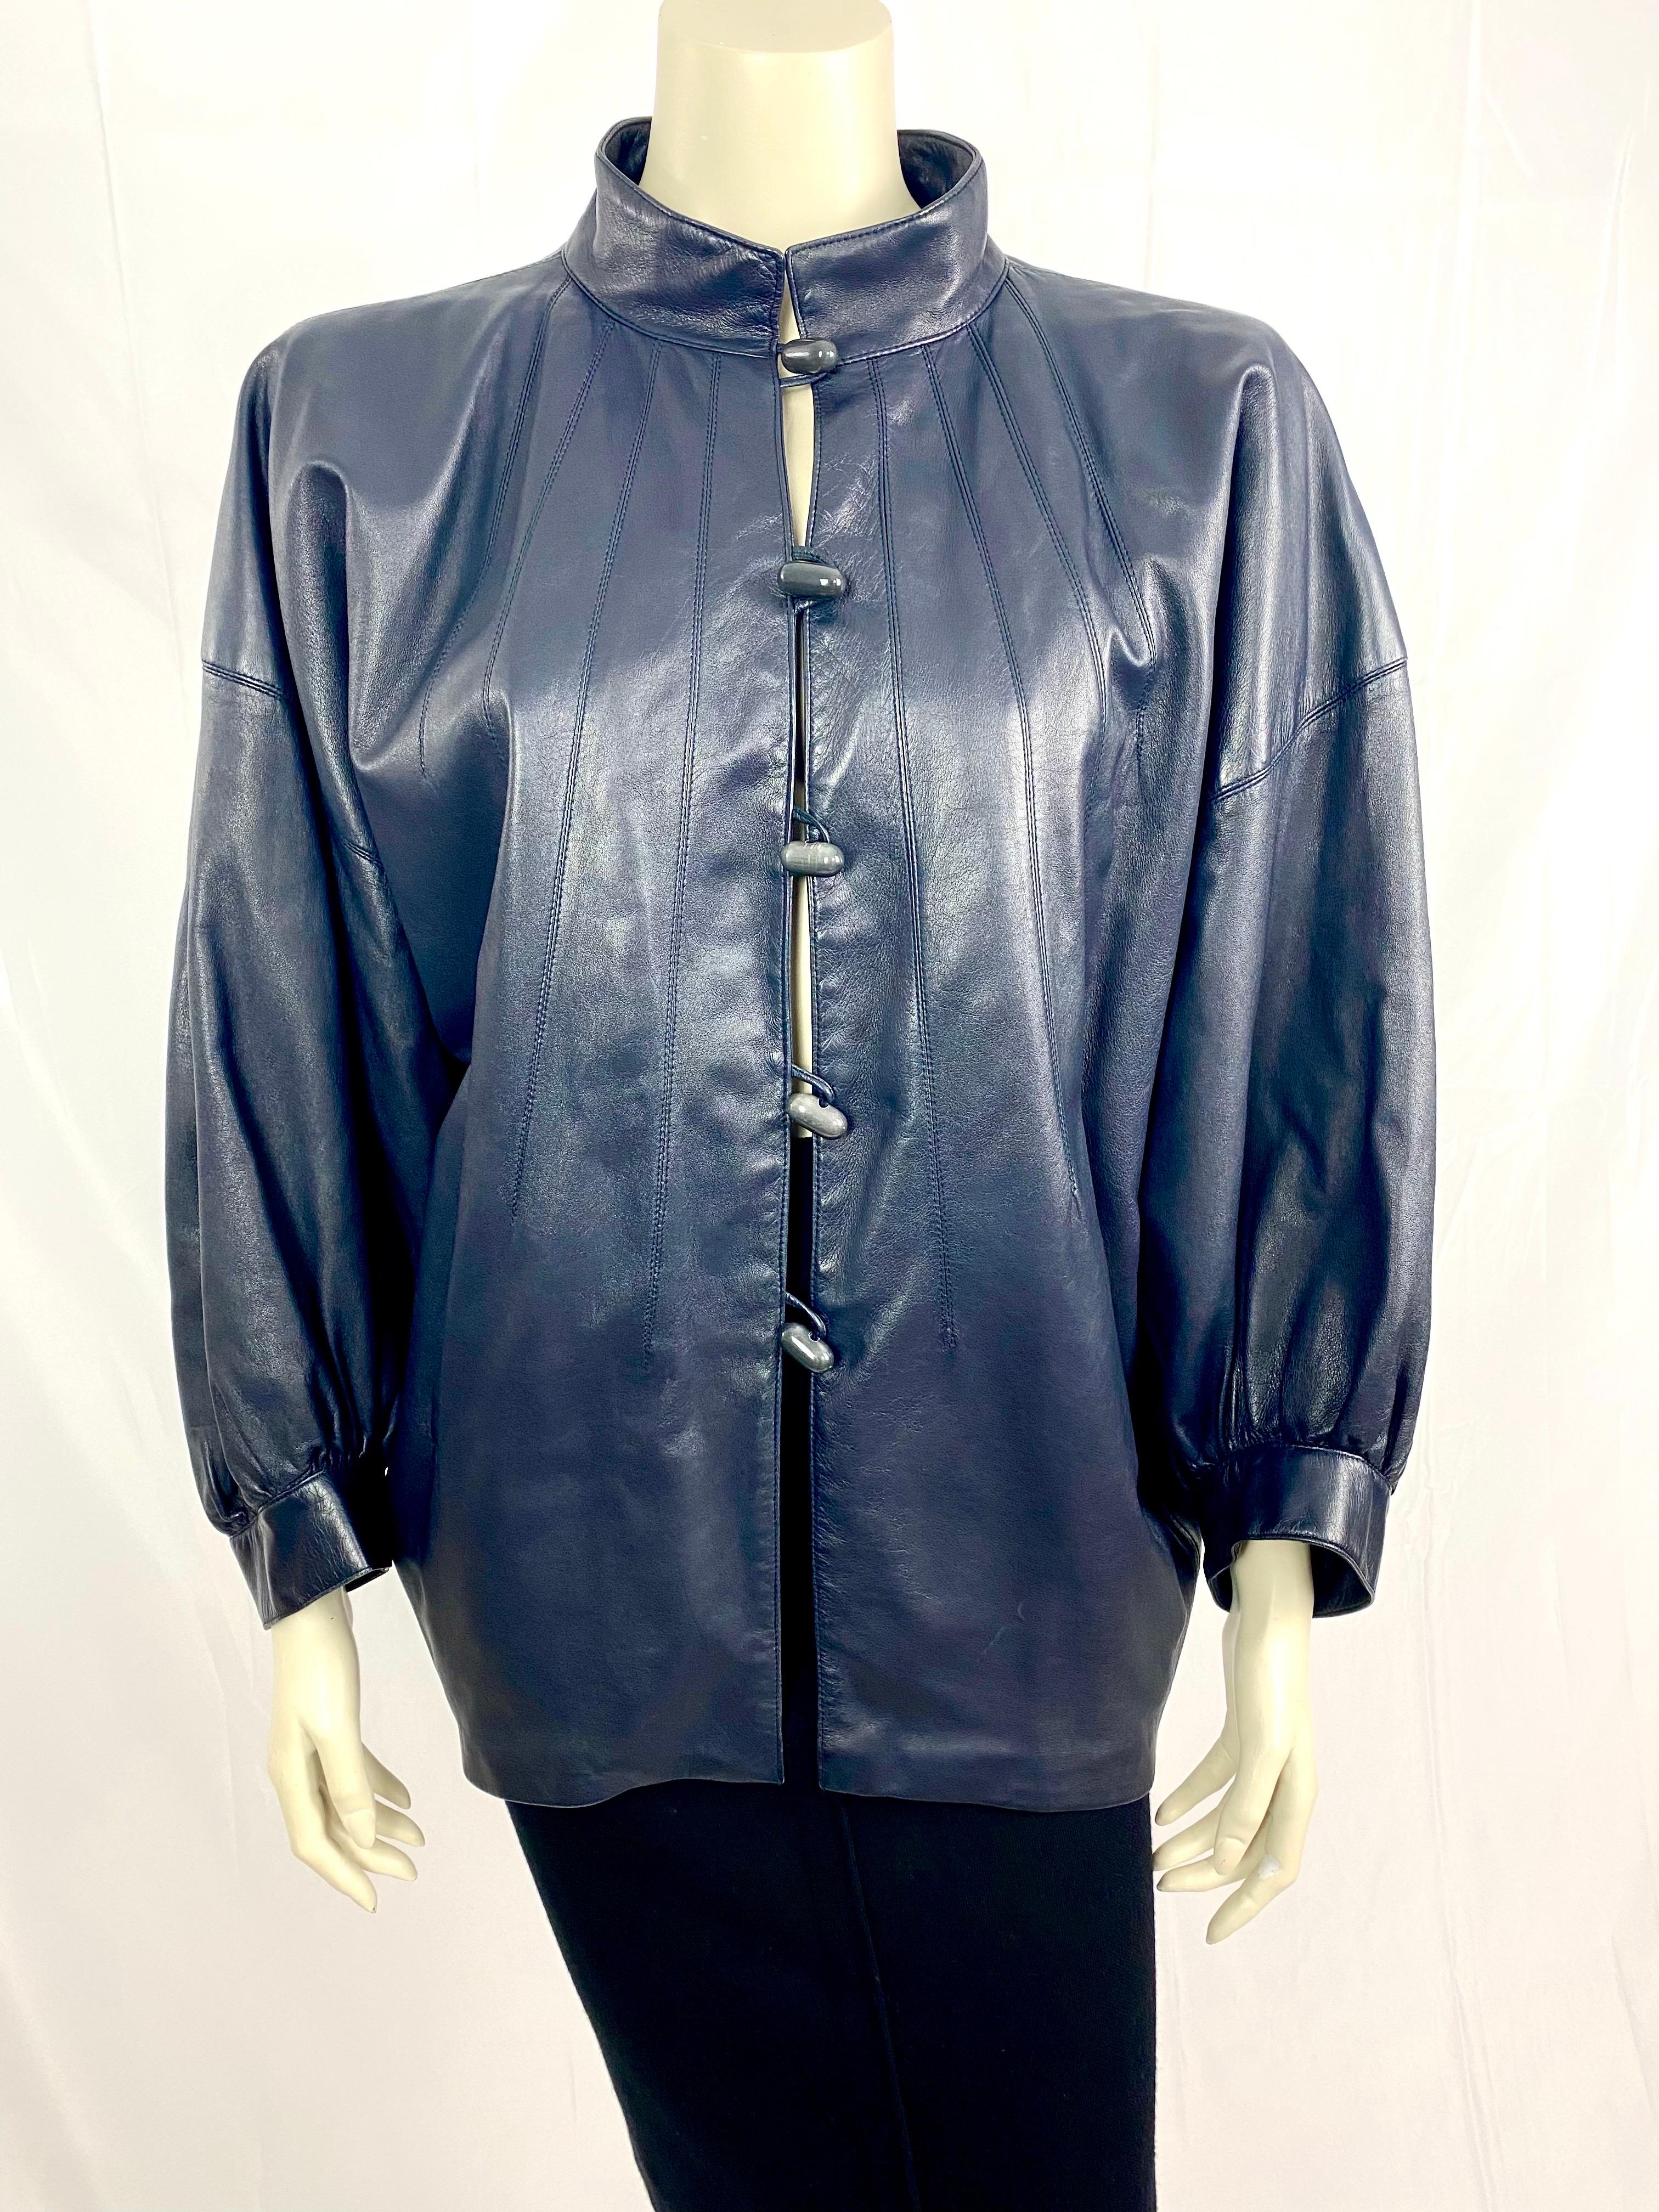 Vintage long jacket in navy blue lambskin by Yves Saint Laurent Rive Gauche from the 1980s, high collar and batwing sleeves.
Closes with 5 cylindrical resin buttons.
Superb seams on the front and back of the coat.
Raglan pockets.
Estimated size 42